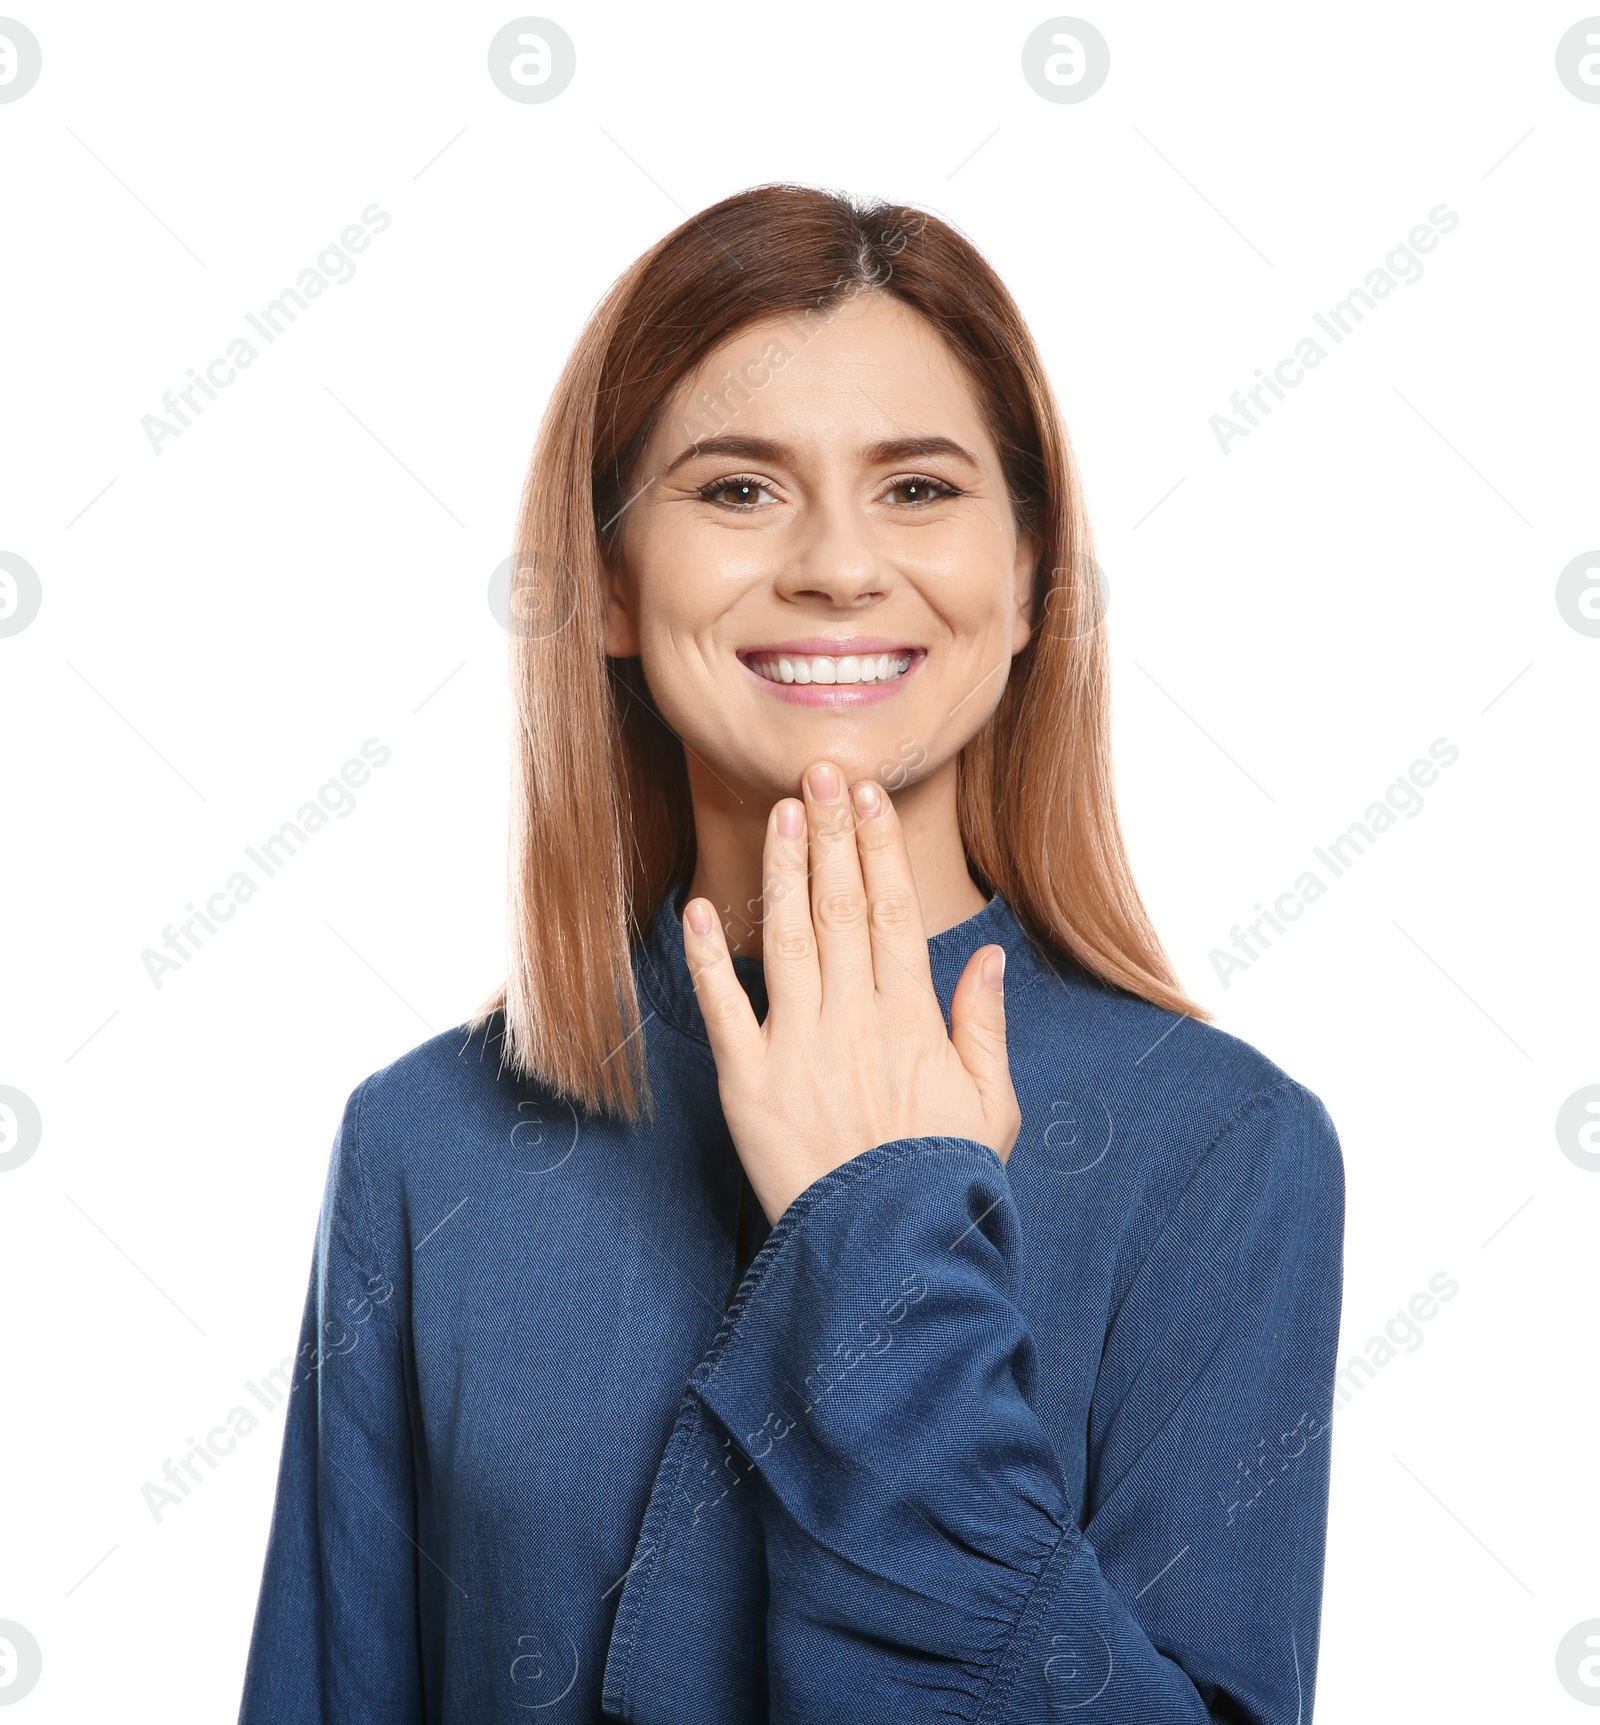 Photo of Woman showing THANK YOU gesture in sign language on white background